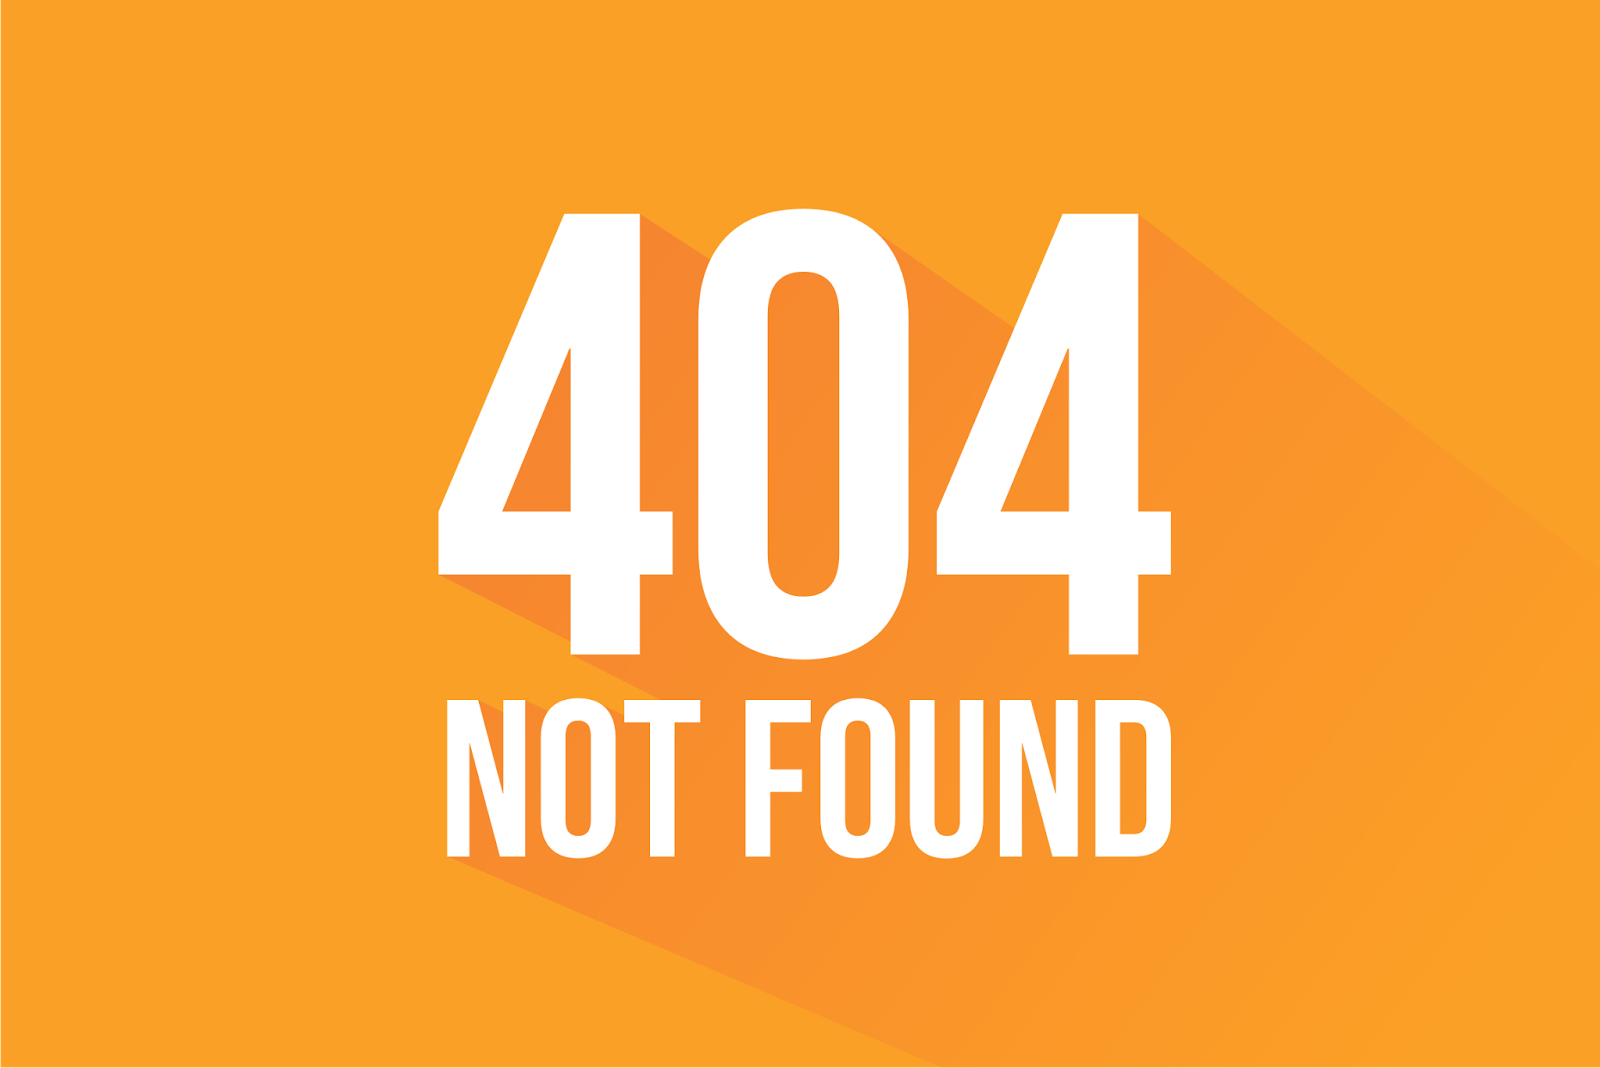 Not found icon. 404 Not found. Картинка not found. 404 Нот фаунд. Картинка 404.